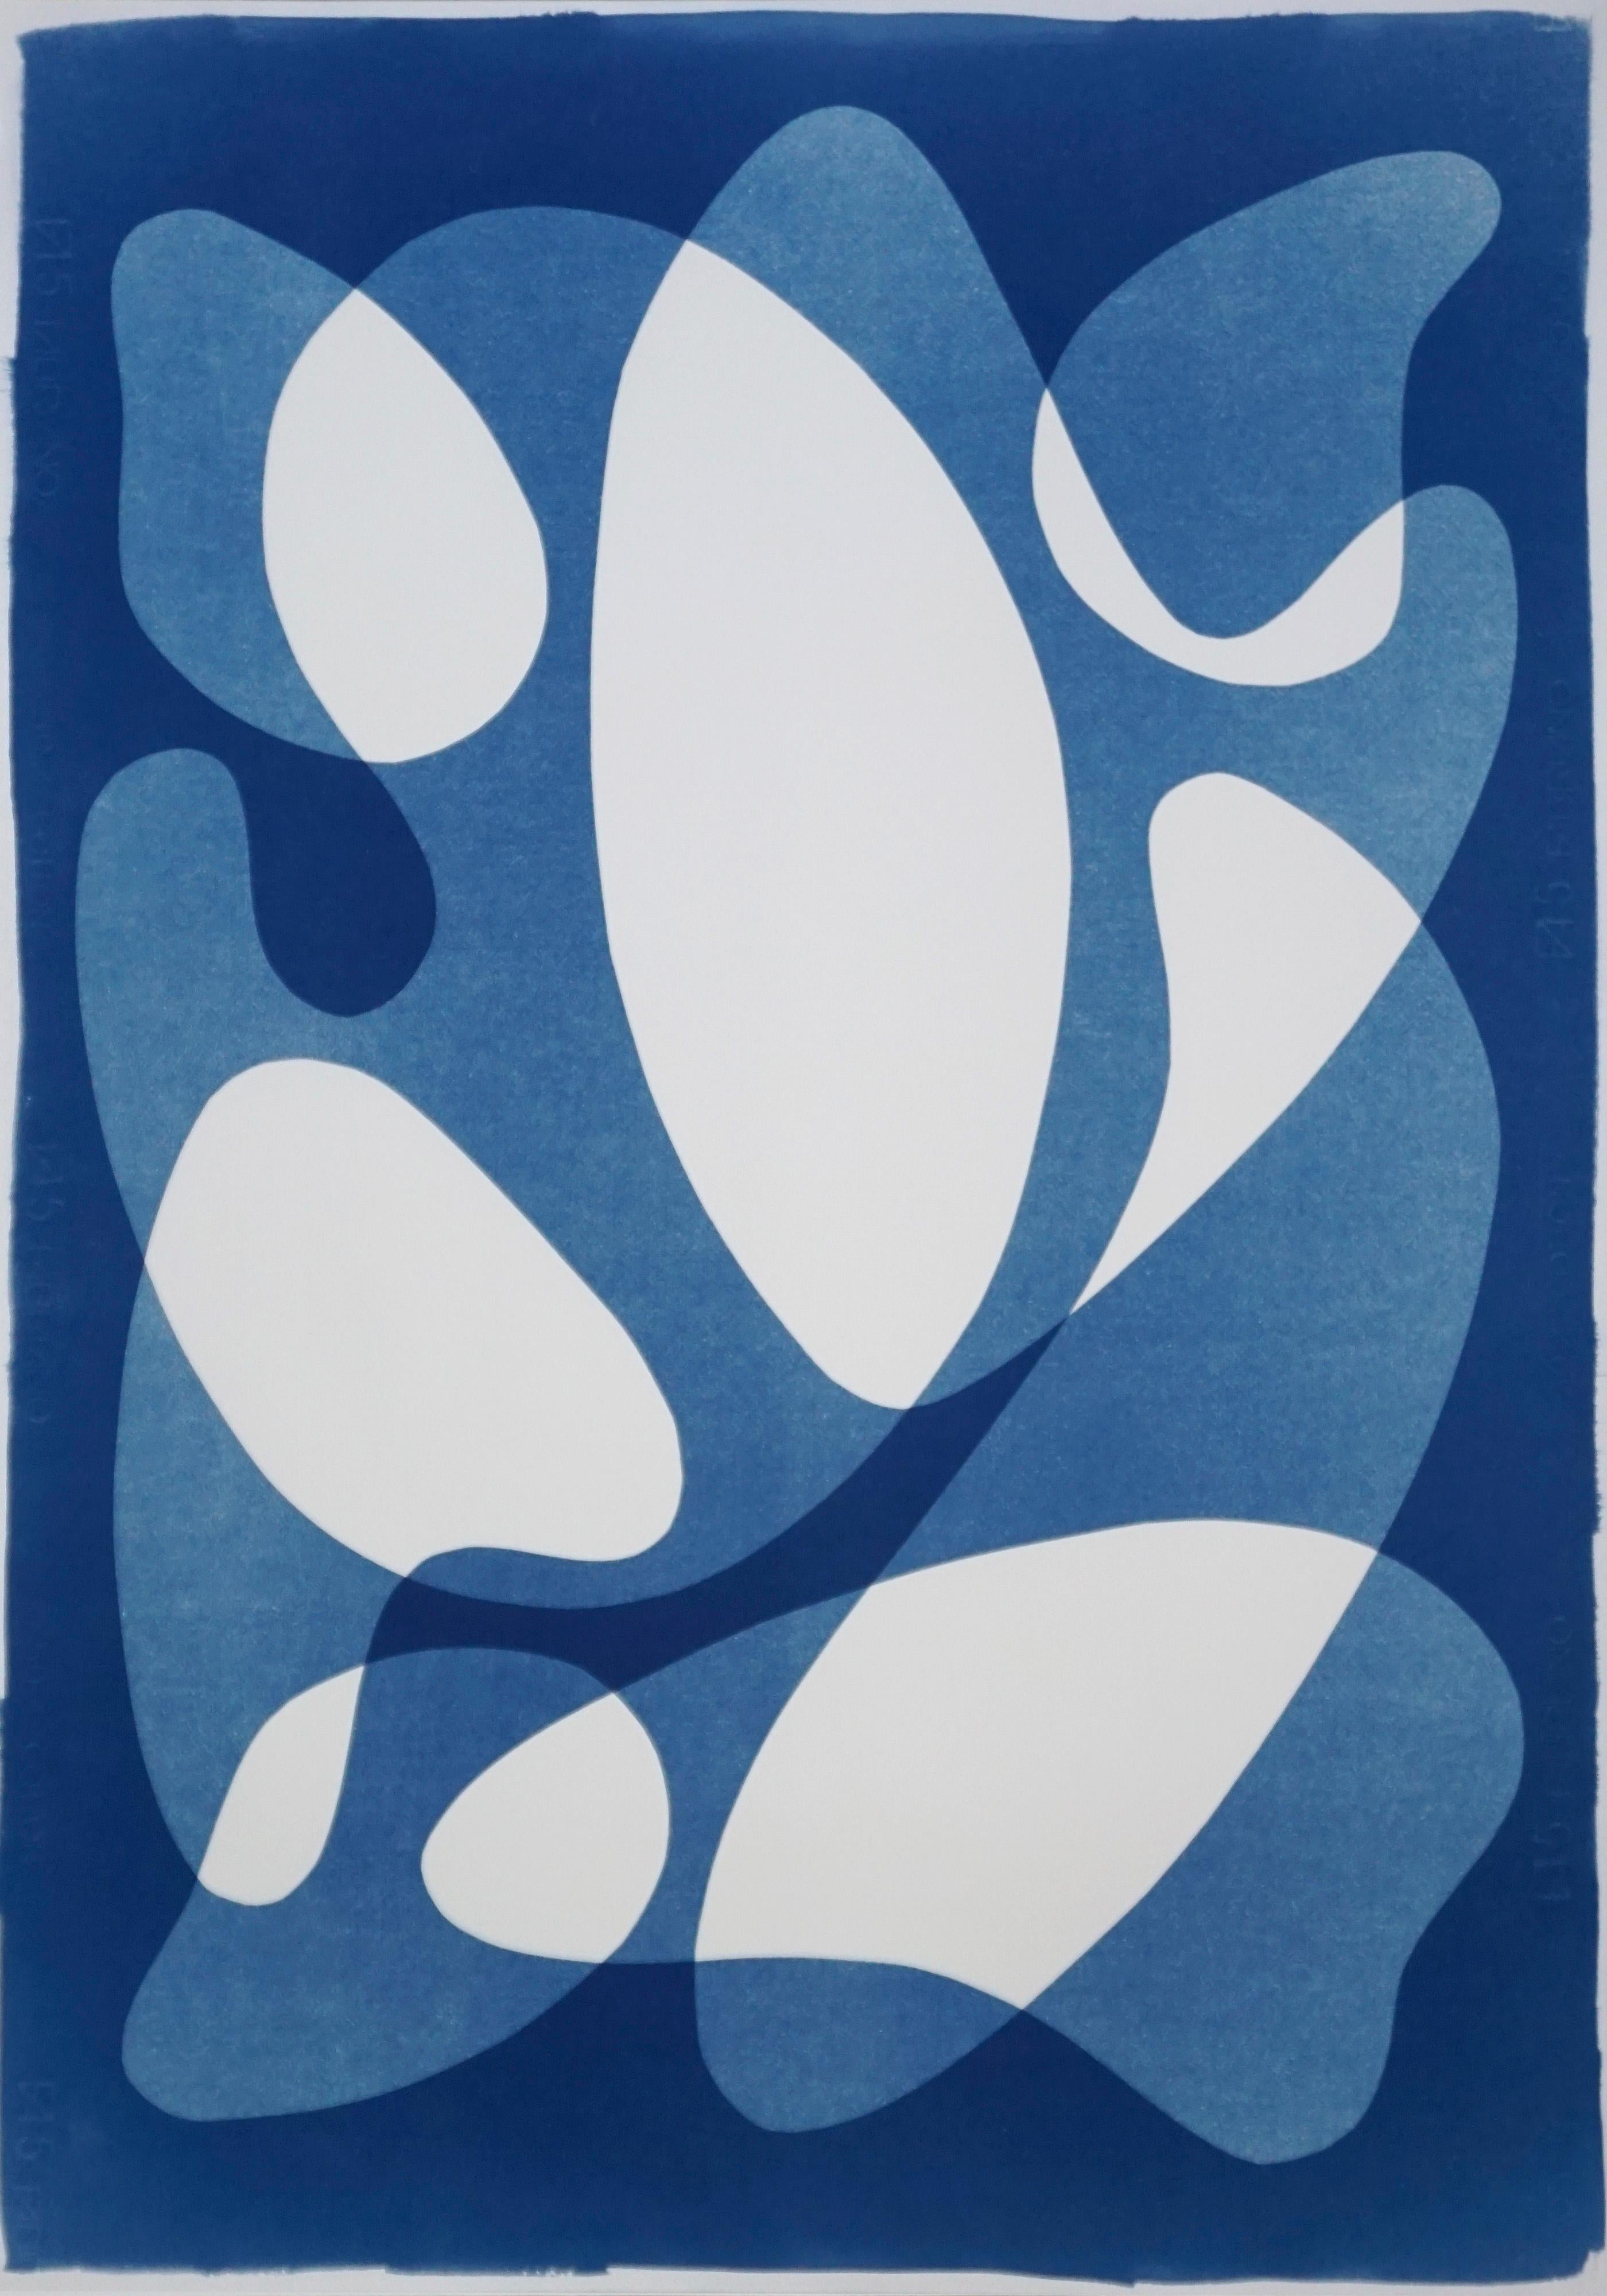 Flowing Curved Shapes, Modern Mid-Century Print on Paper, Blues, Neutral Tones